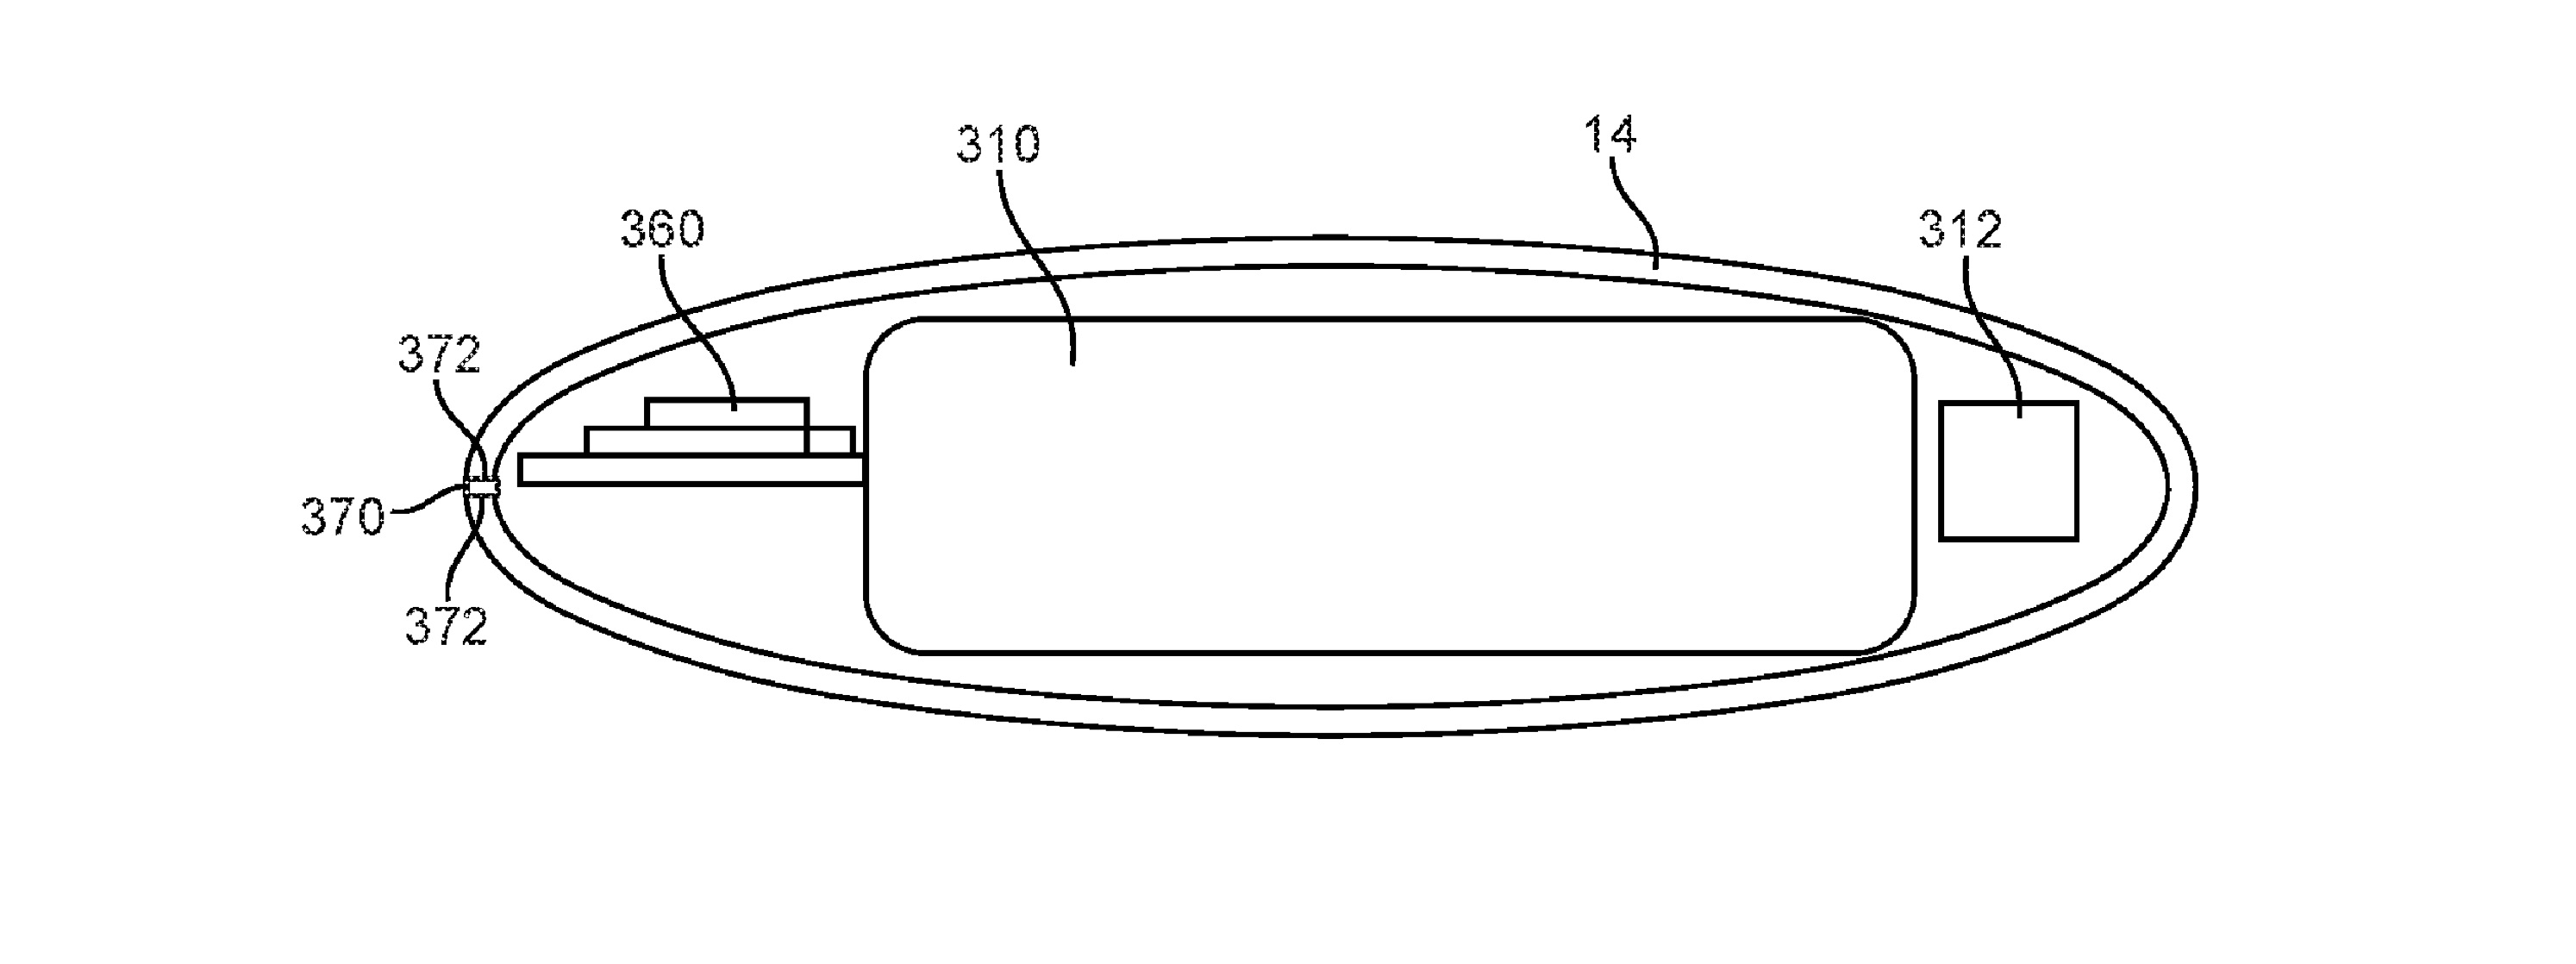 Apple working on Convex-Shaped Devices With Flexible Displays